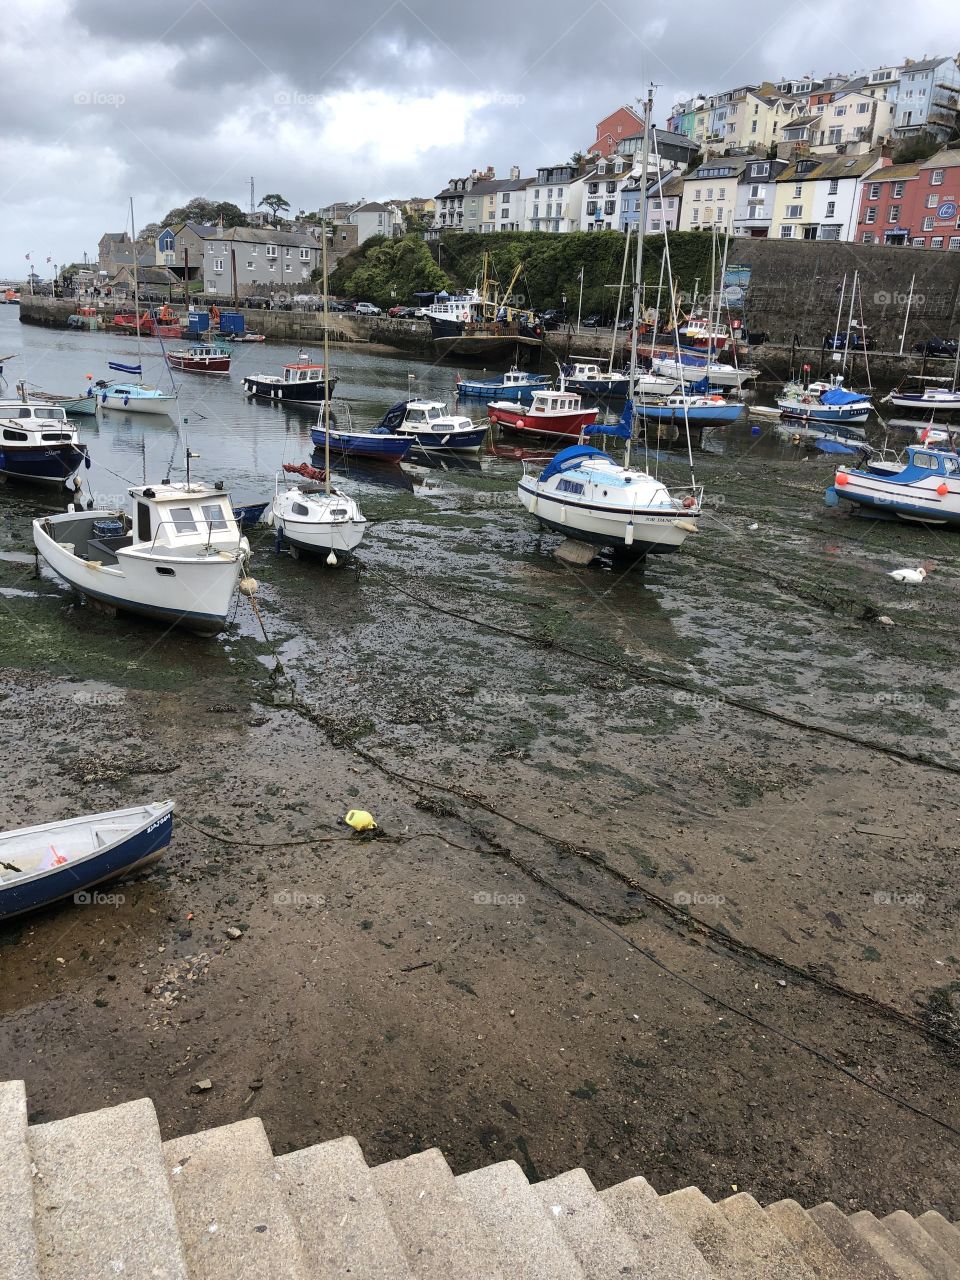 A final photo from the harbour yesterday of Brixham, l was impressed with the end results of these photos, despite the lack of sunshine.